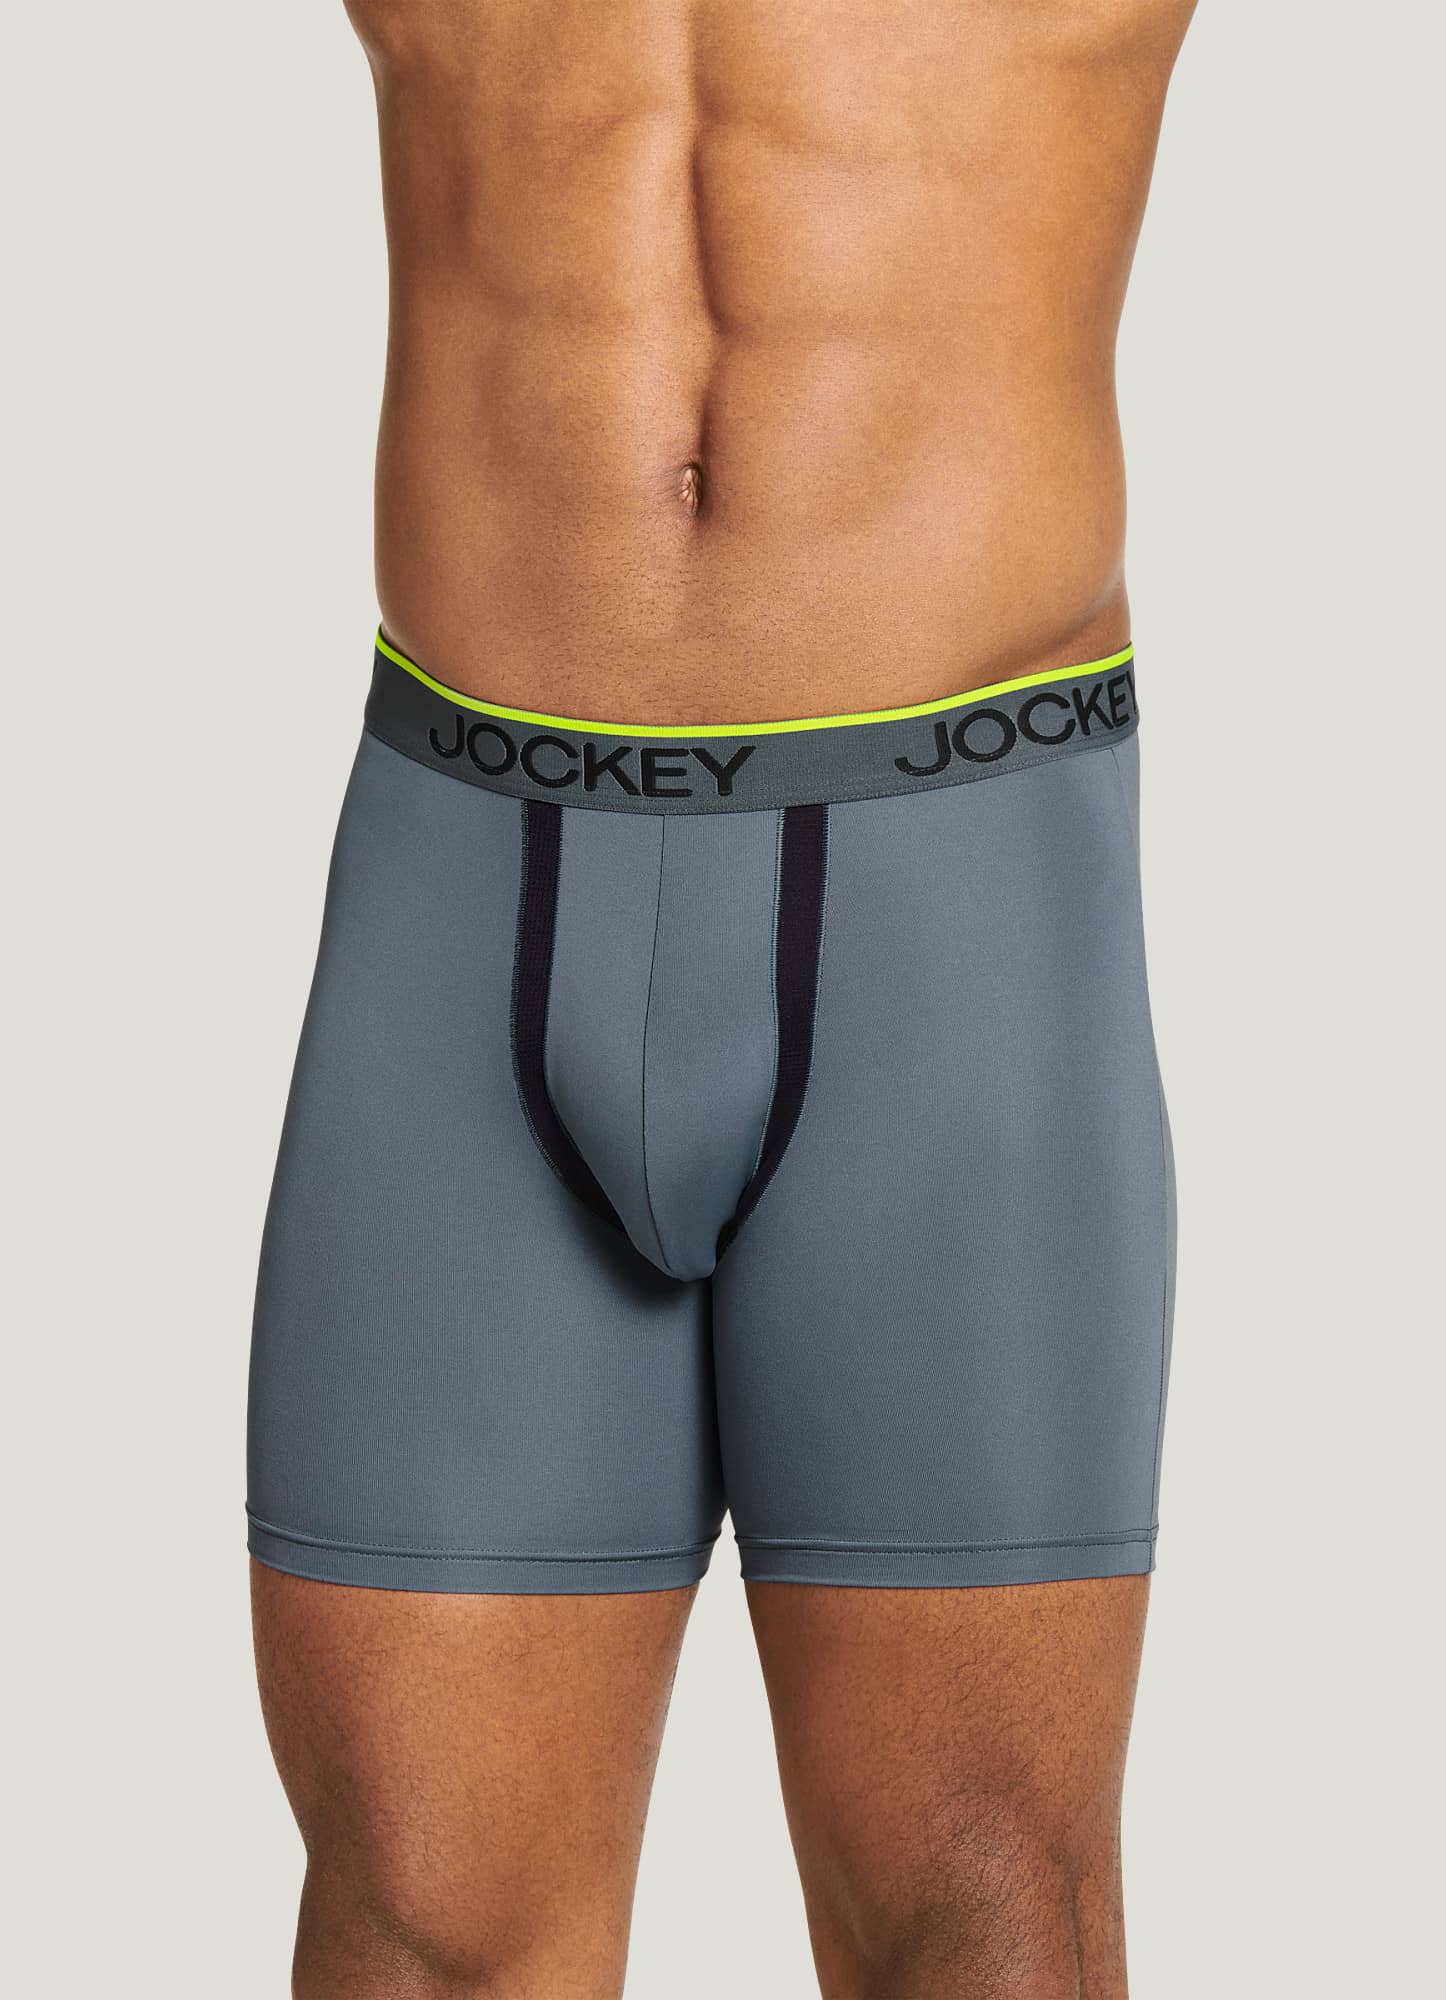 Jockey Big Man Chafe Proof Pouch Cotton Stretch 6 Boxer Brief - 2 Pack